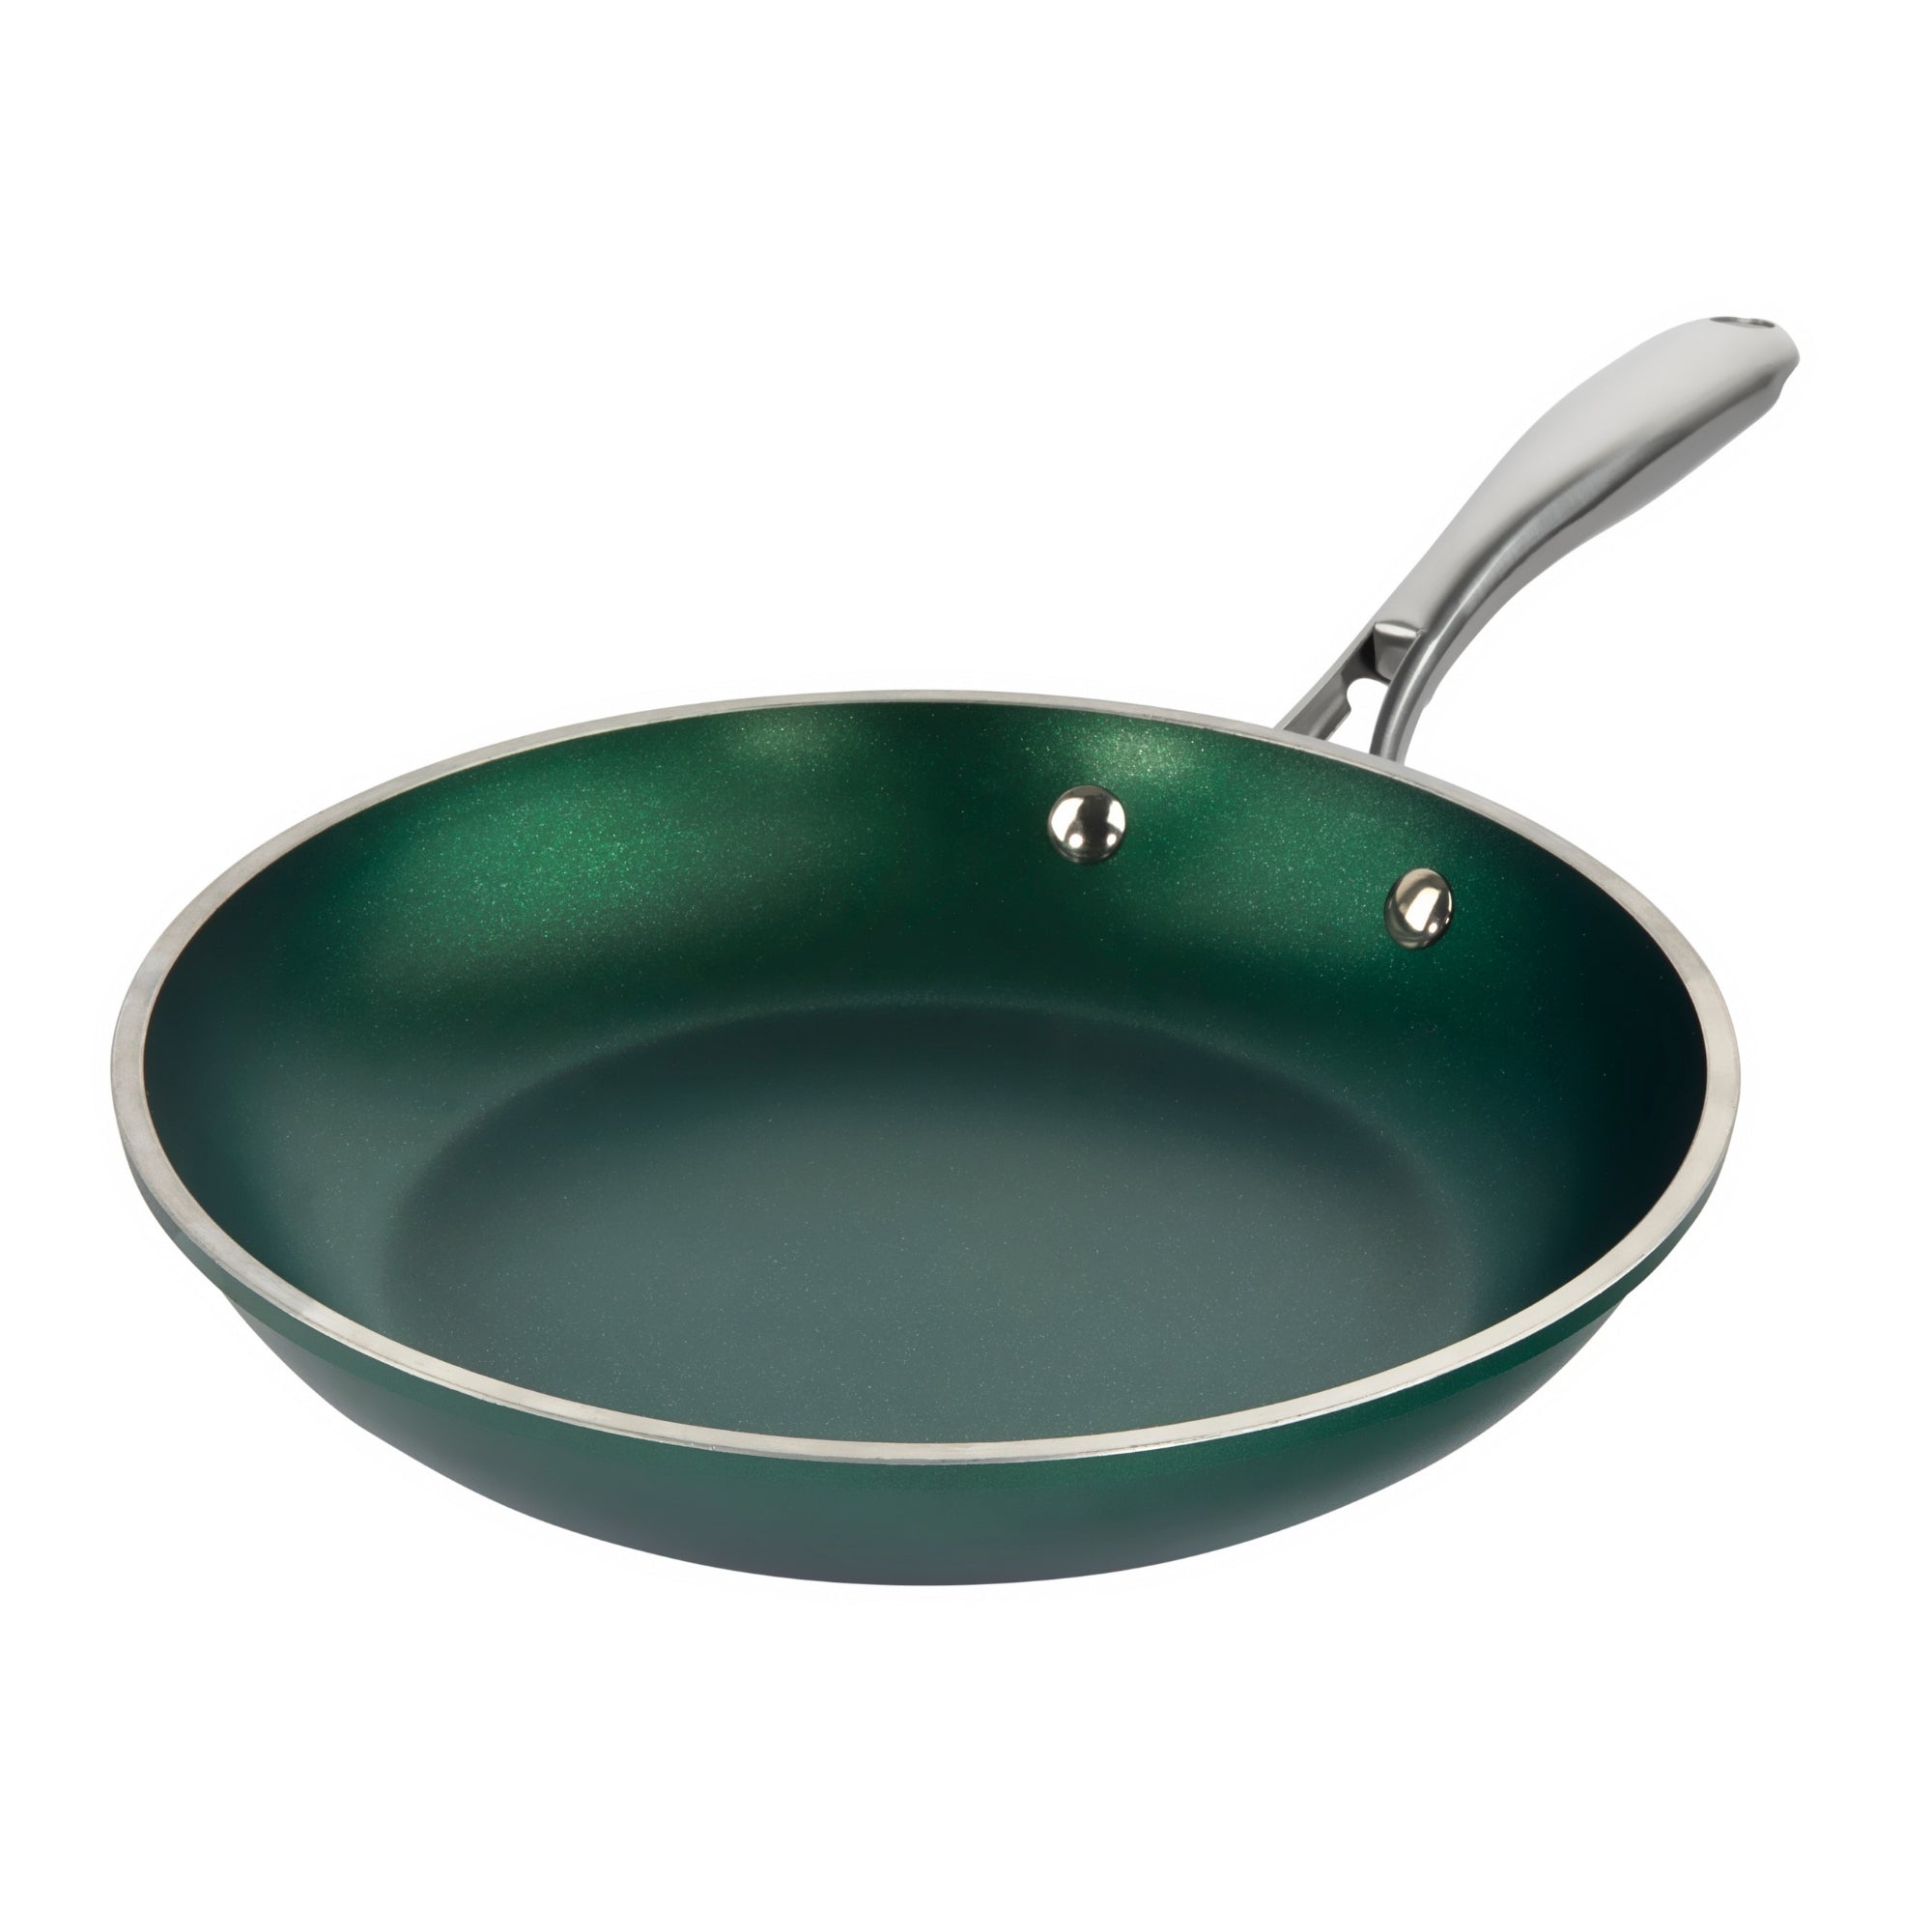 Orgreenic 12in Ceramic Non Stick Frying Pan - Green for sale online